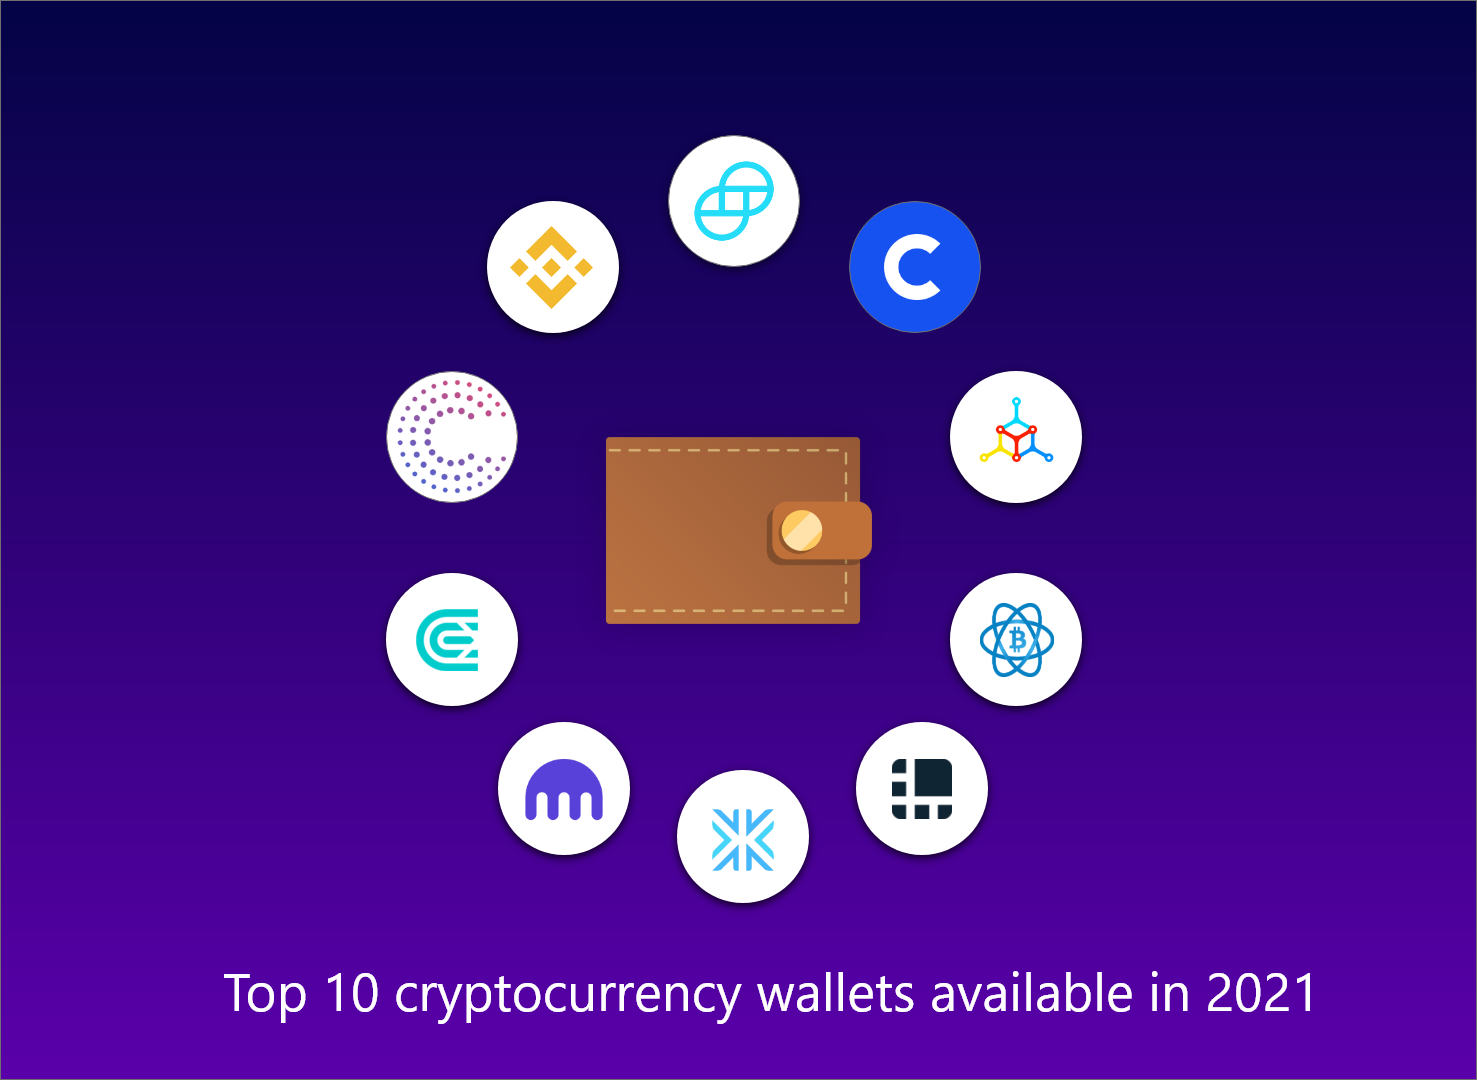 Top 10 cryptocurrency wallets available in 2021